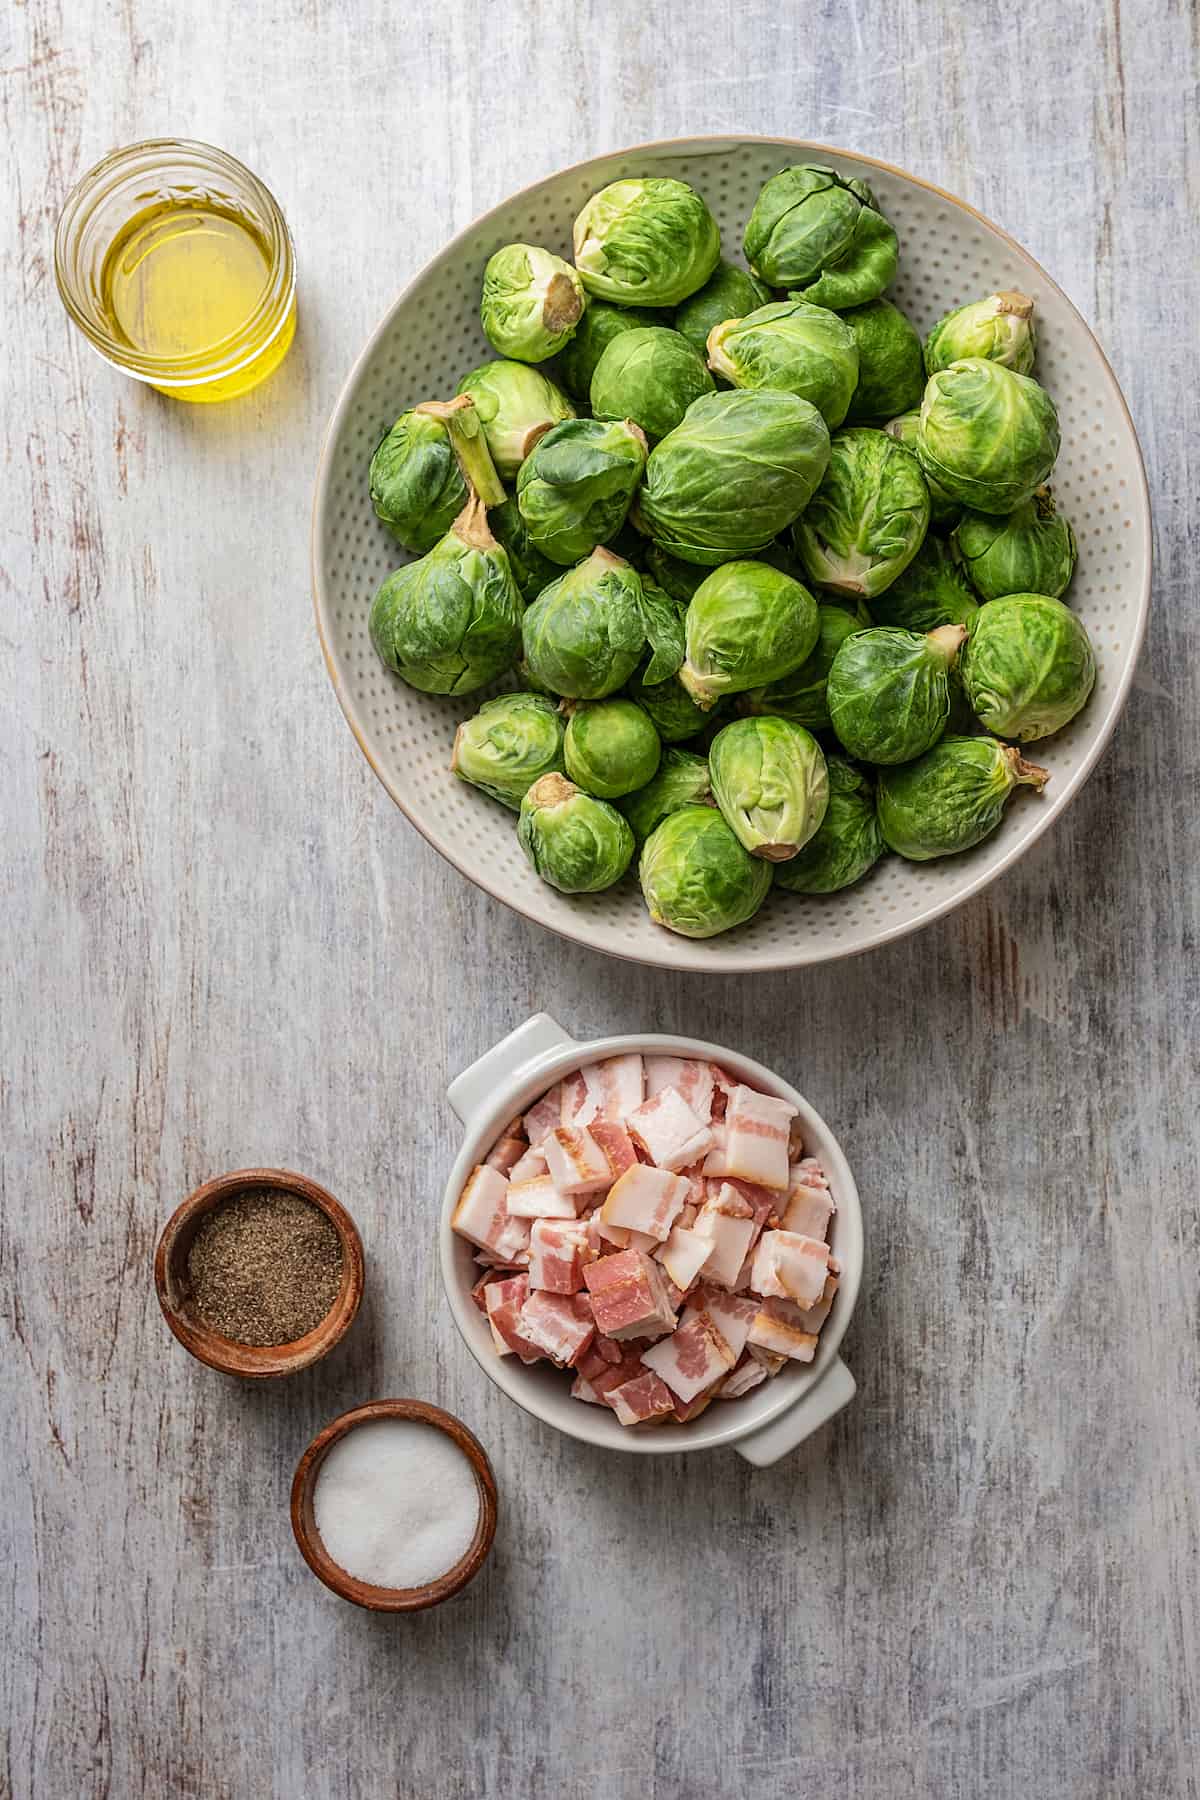 Ingredients for Brussels sprouts and bacon separated into bowls.